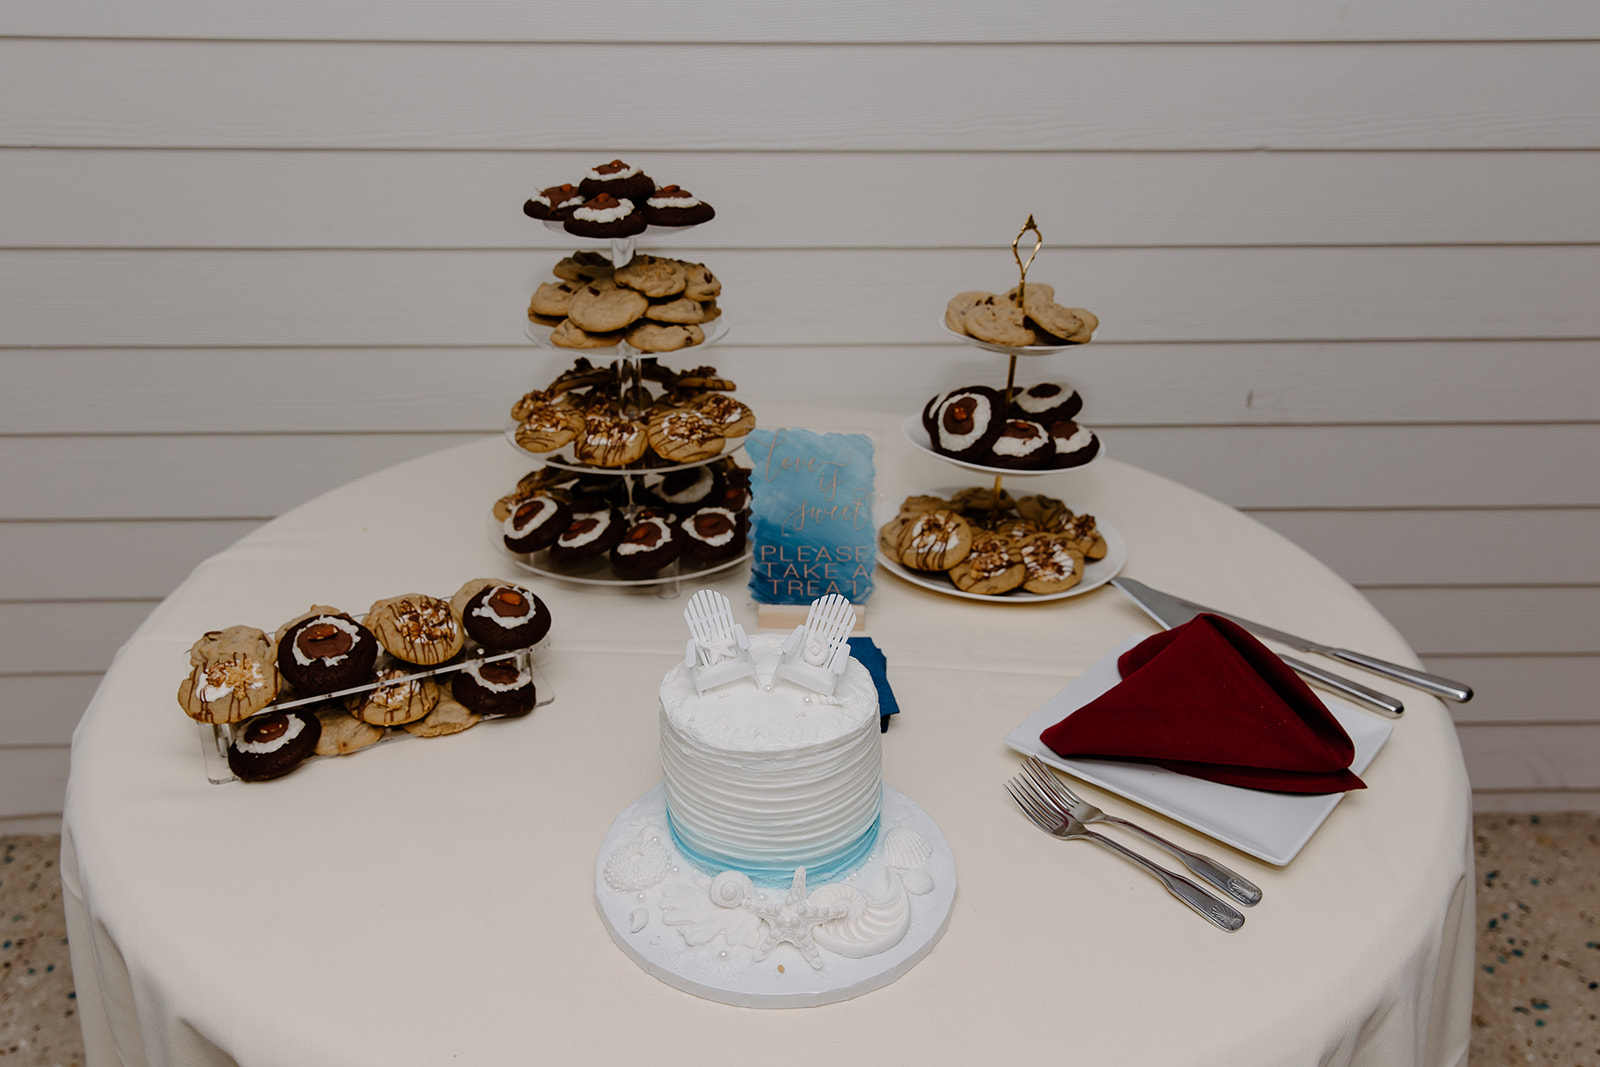 Table full of wedding cake and other desserts